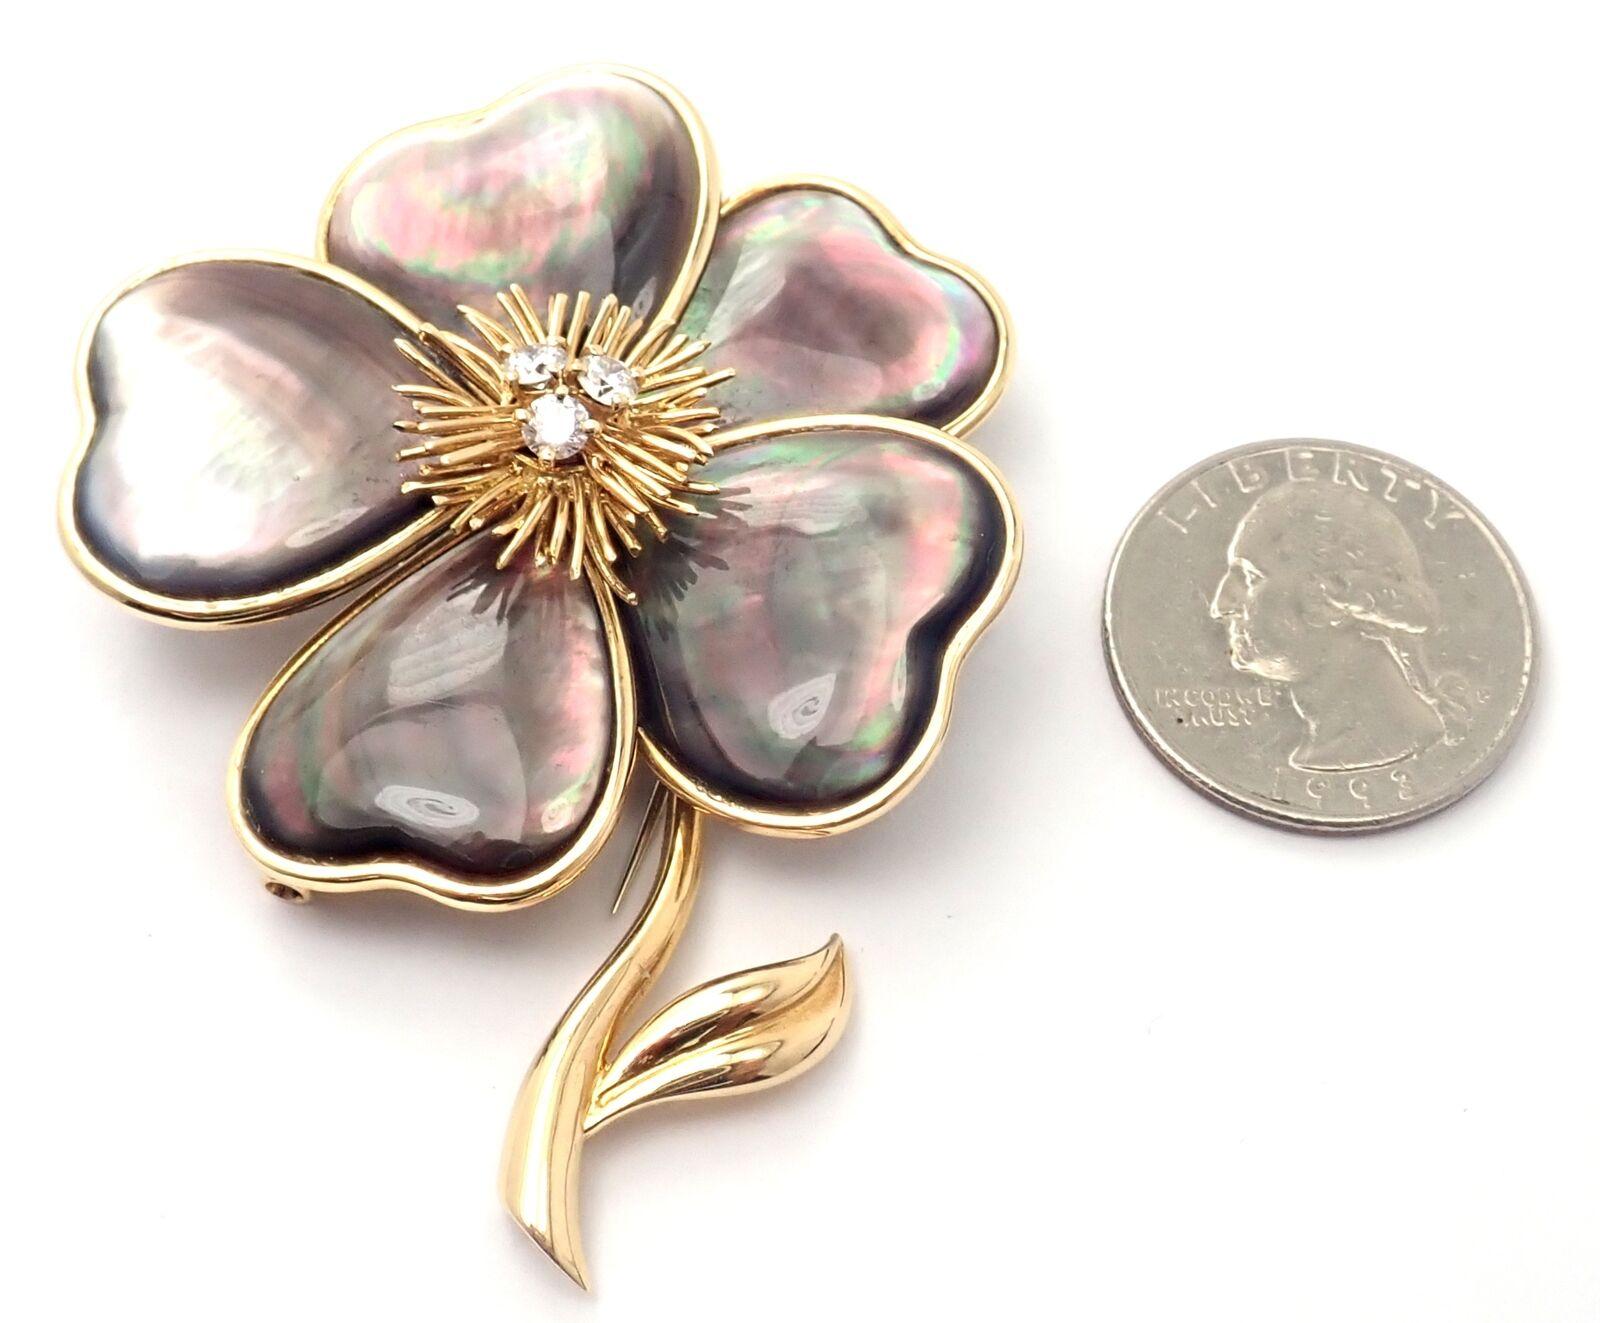 Van Cleef & Arpels Clématite Flower Diamond Grey Mother of Pearl Gold Pin Brooch In Excellent Condition For Sale In Holland, PA